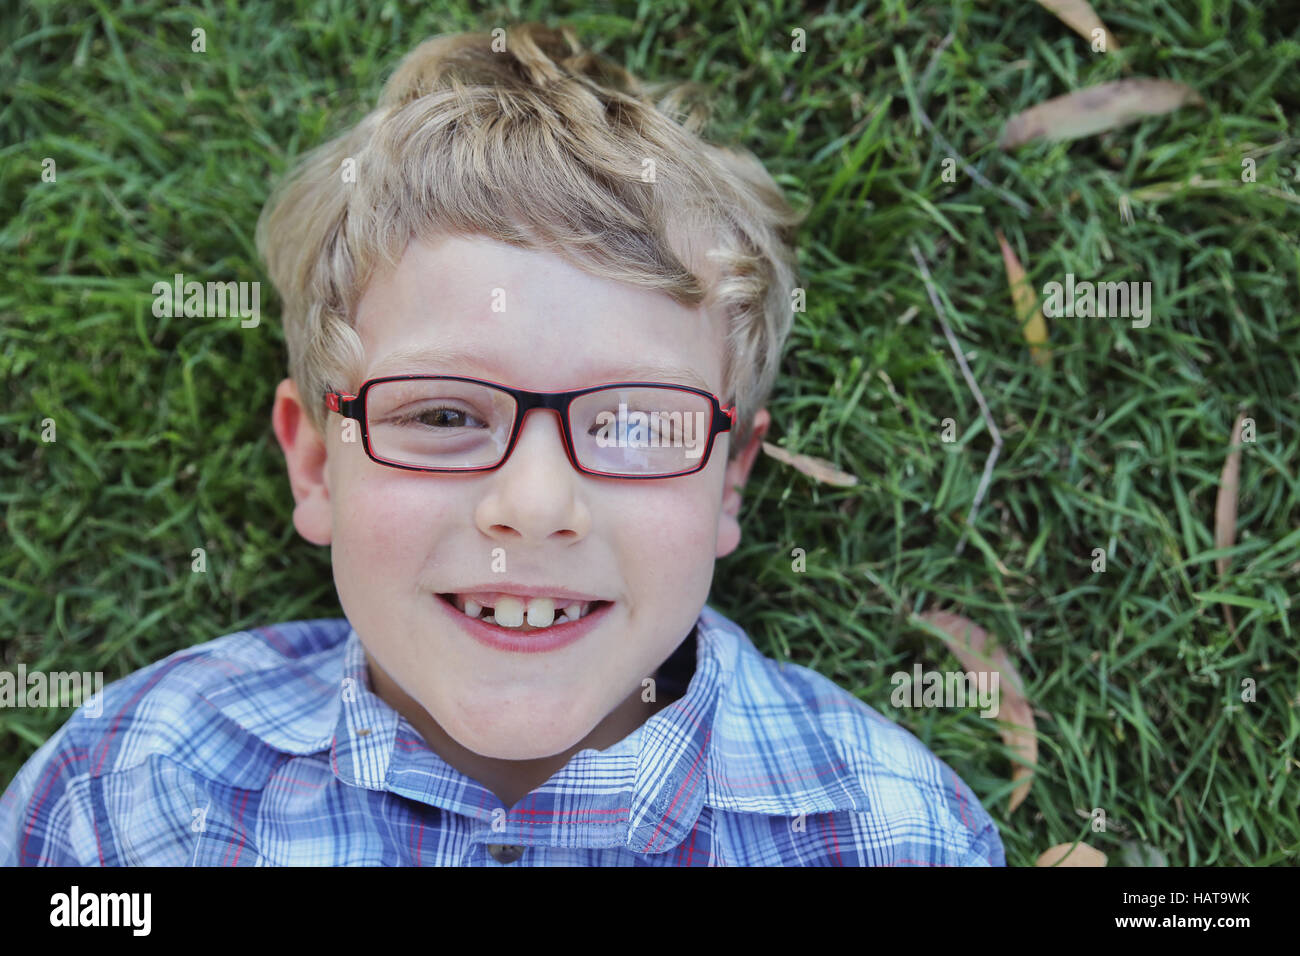 Little Boy Wearing Glasses High Resolution Stock Photography and Images -  Alamy